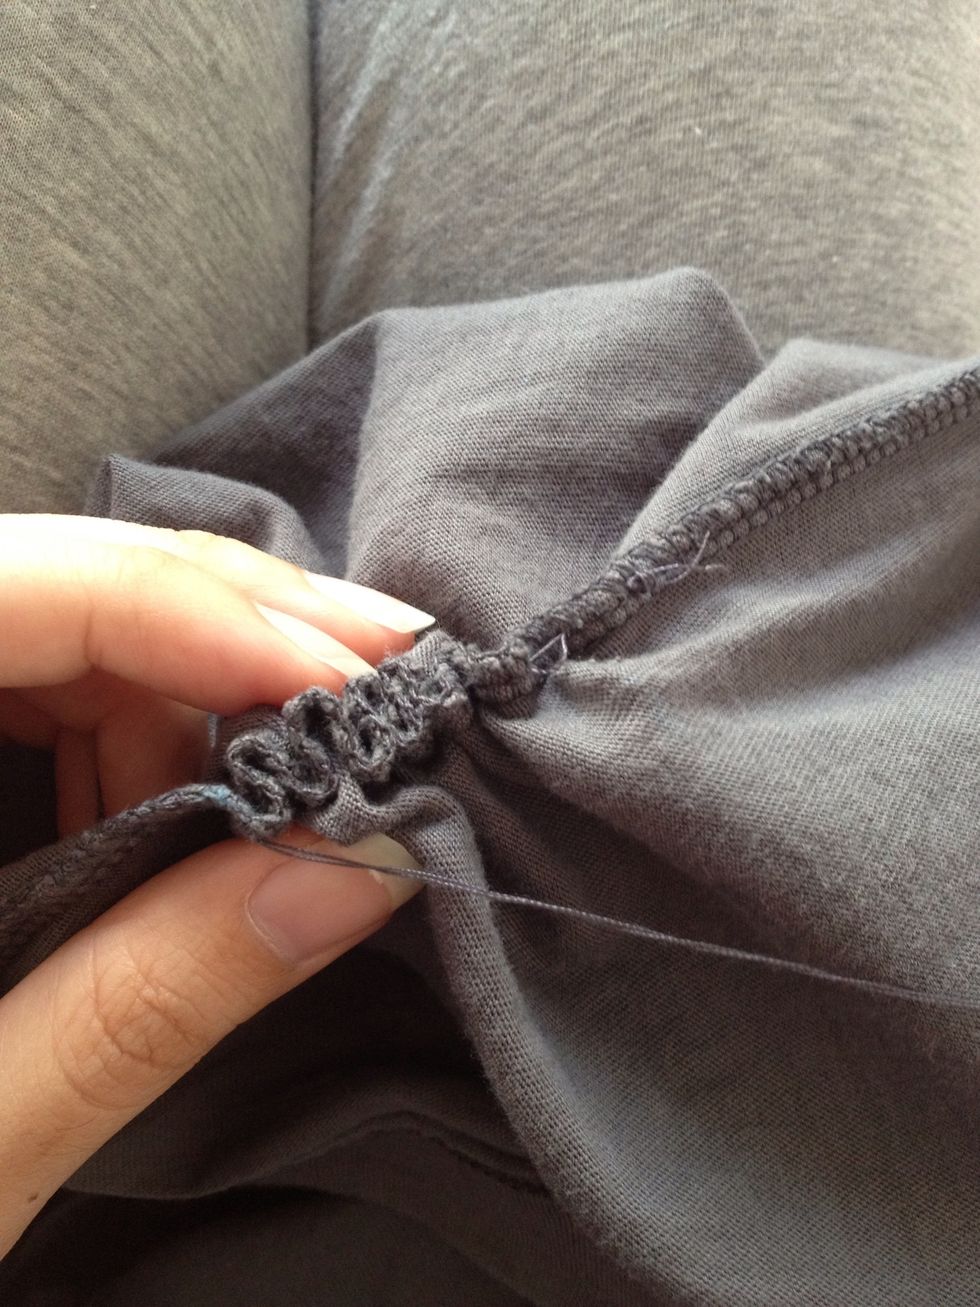 Pull the stitches together until you are satisfied with how tight the scrunches are.